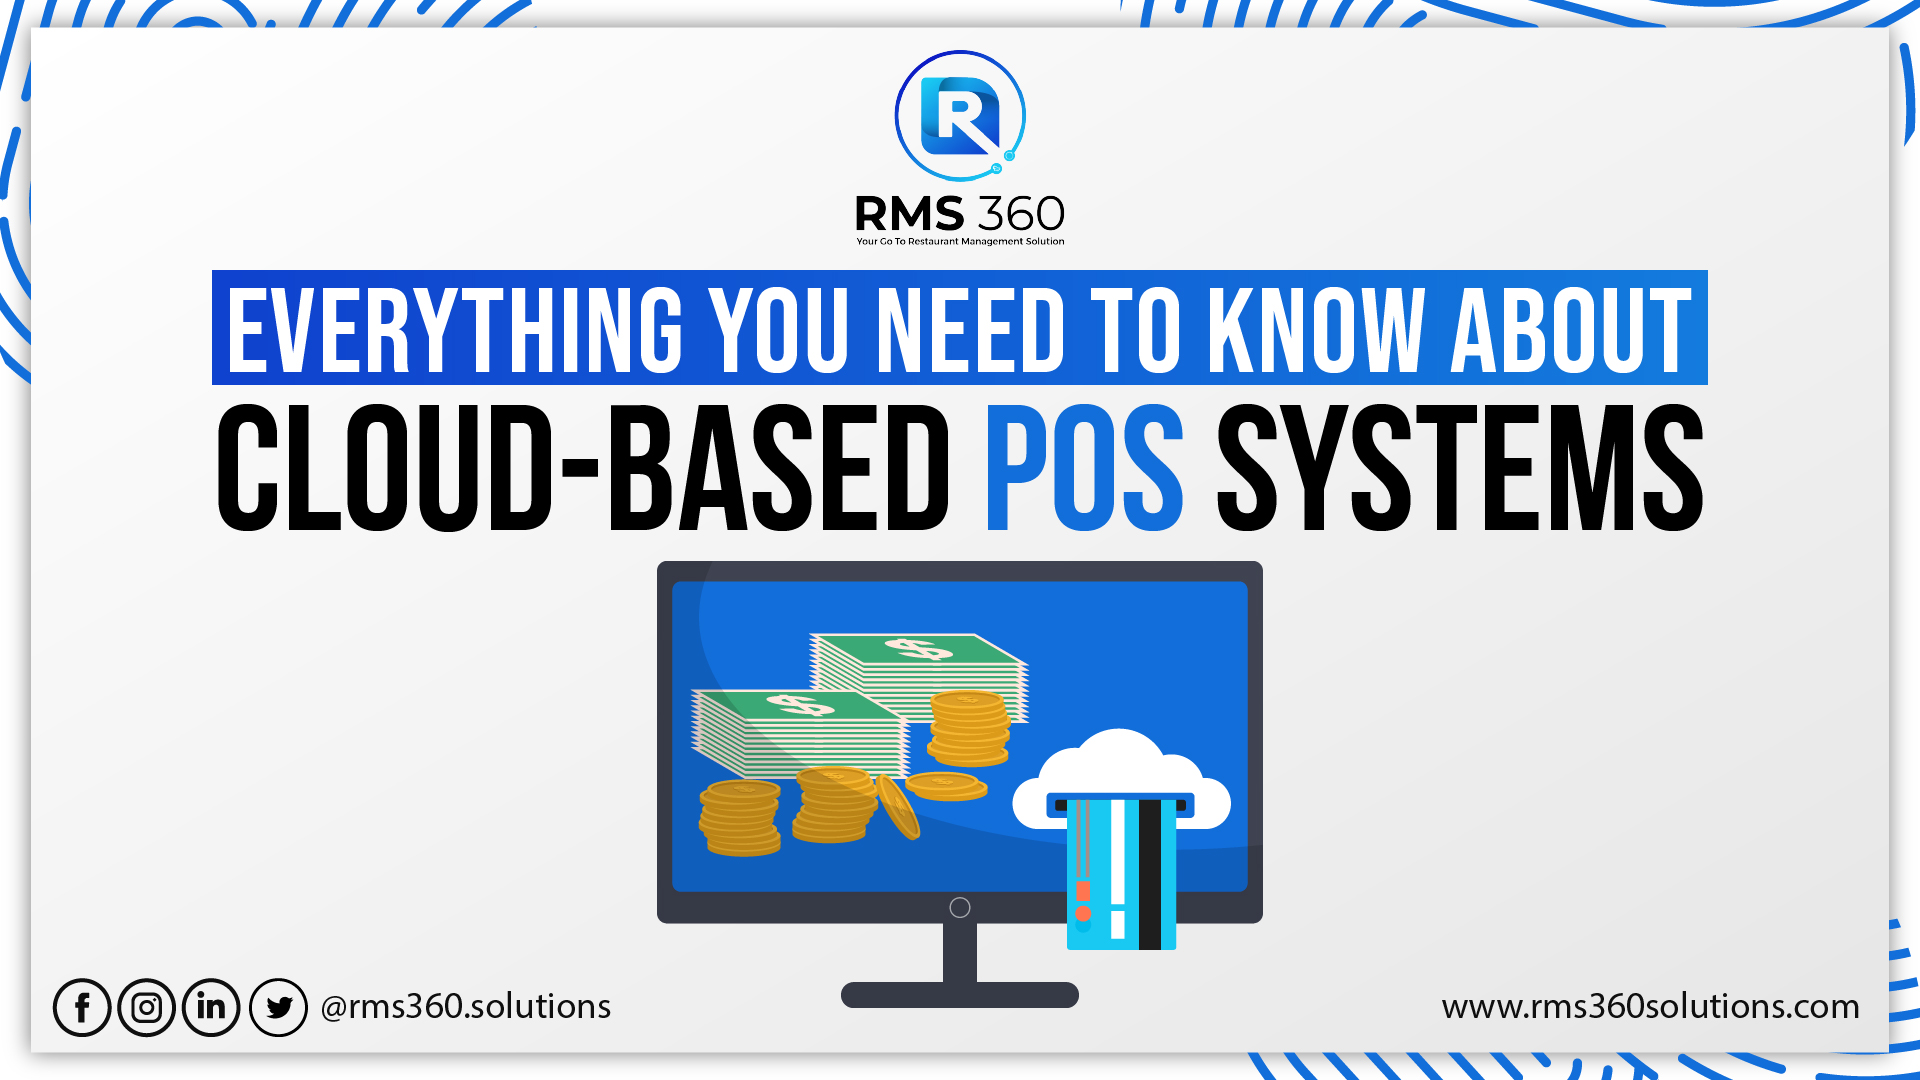 Everything You Need to Know About Cloud-Based POS Systems